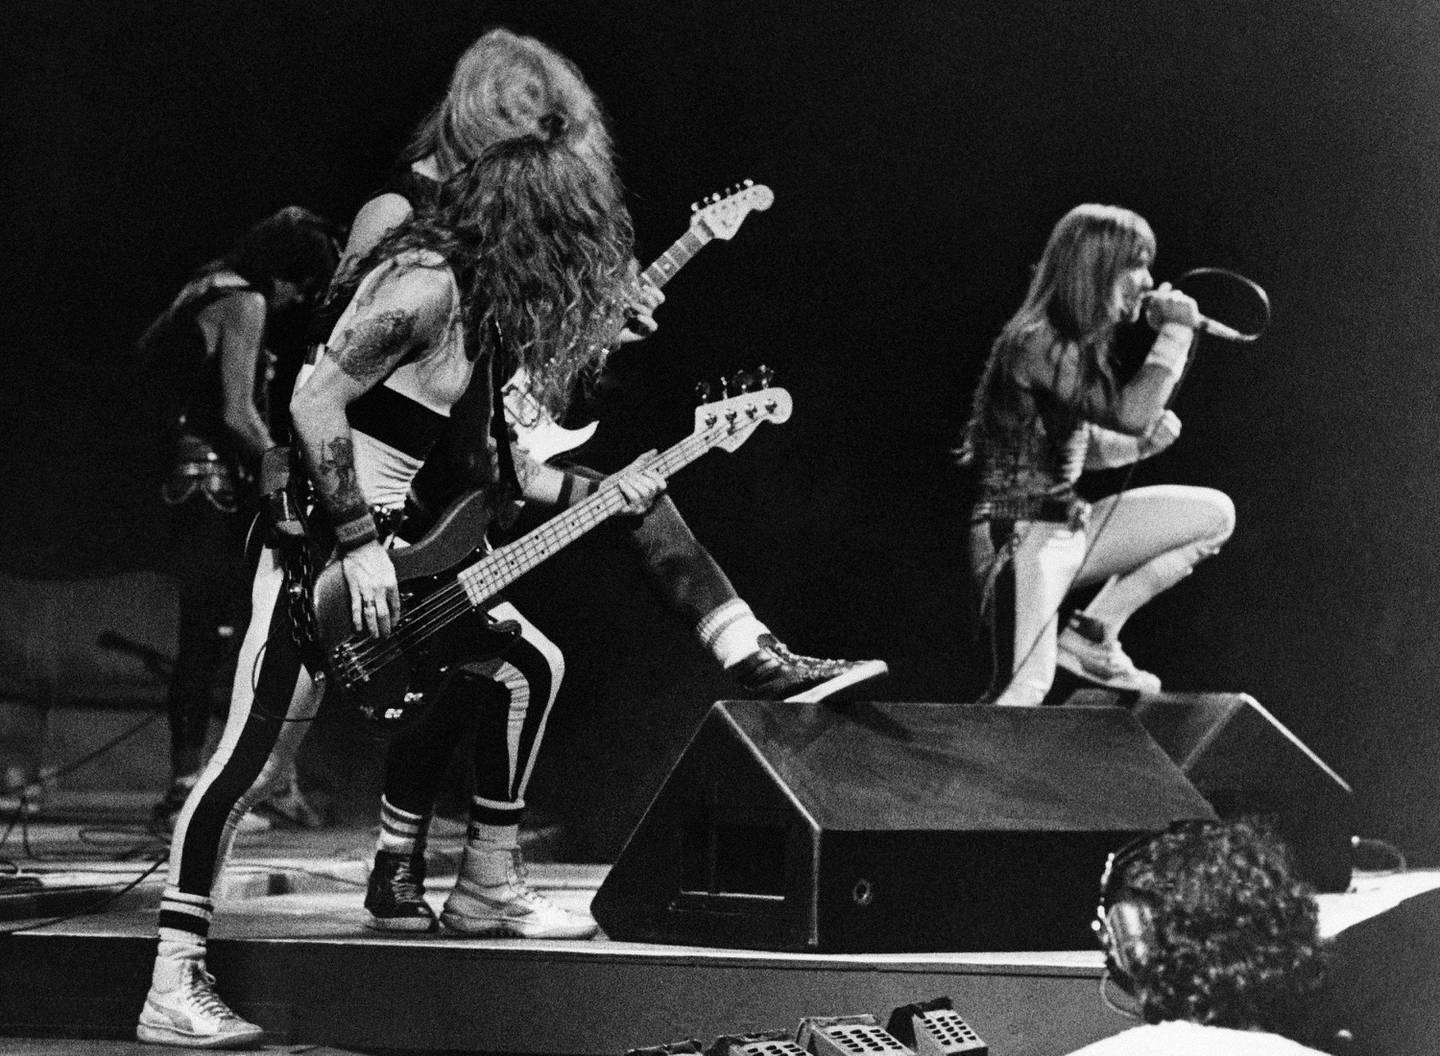 The British hard Rock group Iron Maiden performing Friday night, Jan 12, 1985 at the opening night of Rio de Janeiro's Rock in Rio music festival. (AP Photo)